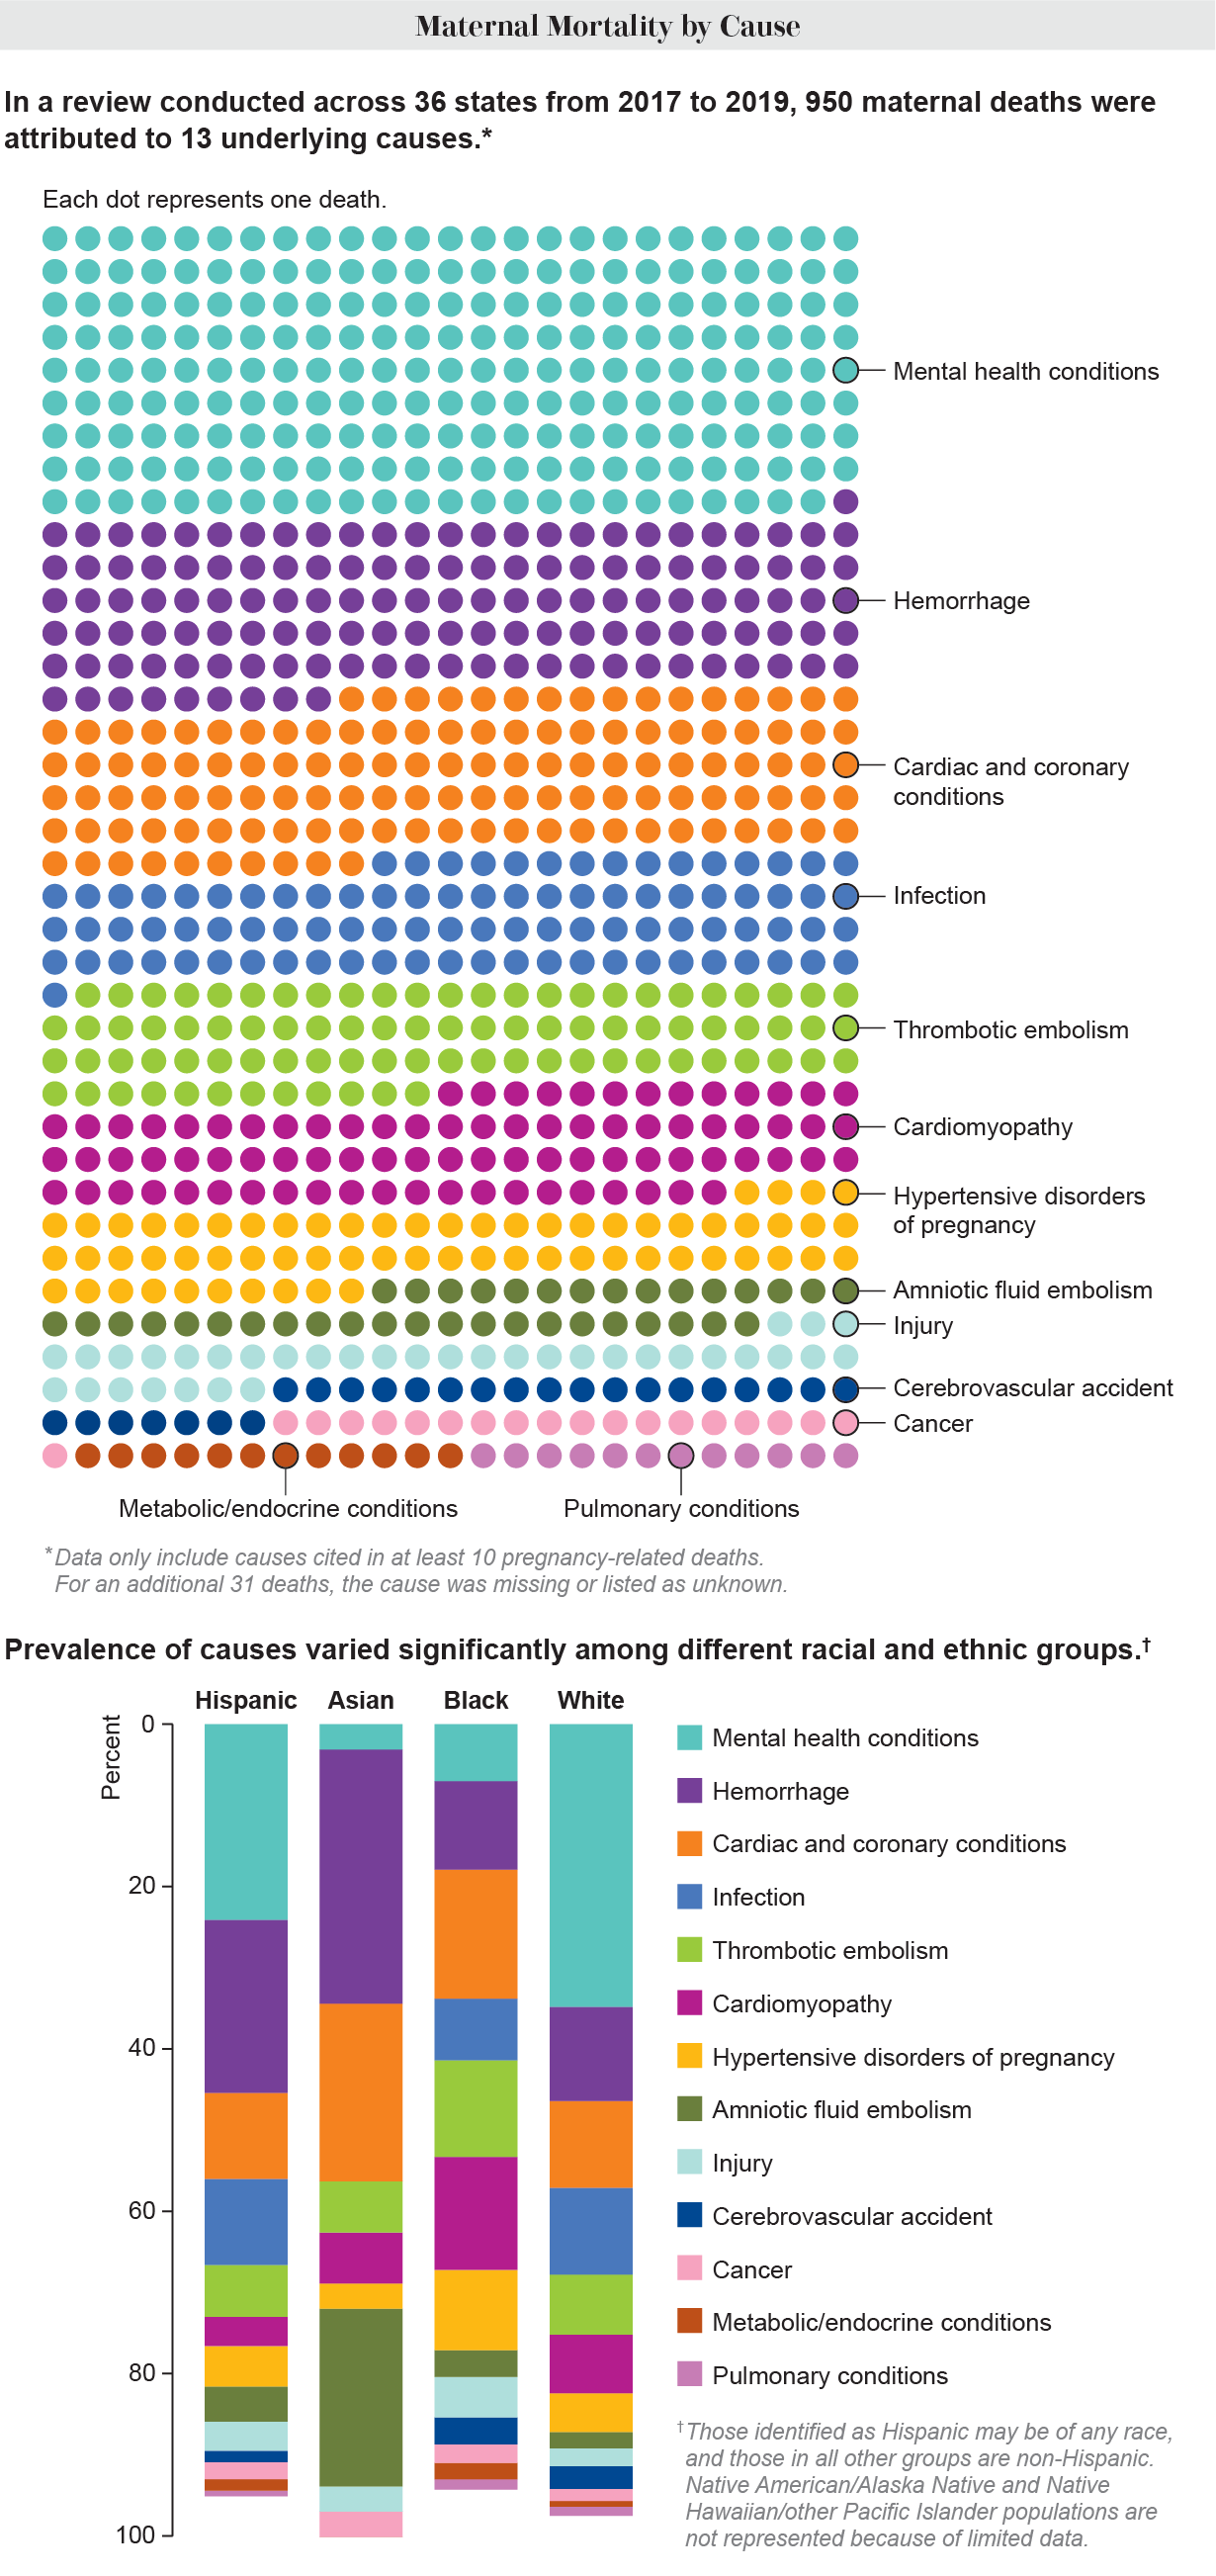 Graphic highlights 13 underlying causes for 950 maternal deaths that occurred from 2017 to 2019, based on a review conducted across 36 states, with dots representing each death and colored according to cause. Stacked bar chart shows breakdown of underlying causes among four racial or ethnic groups.